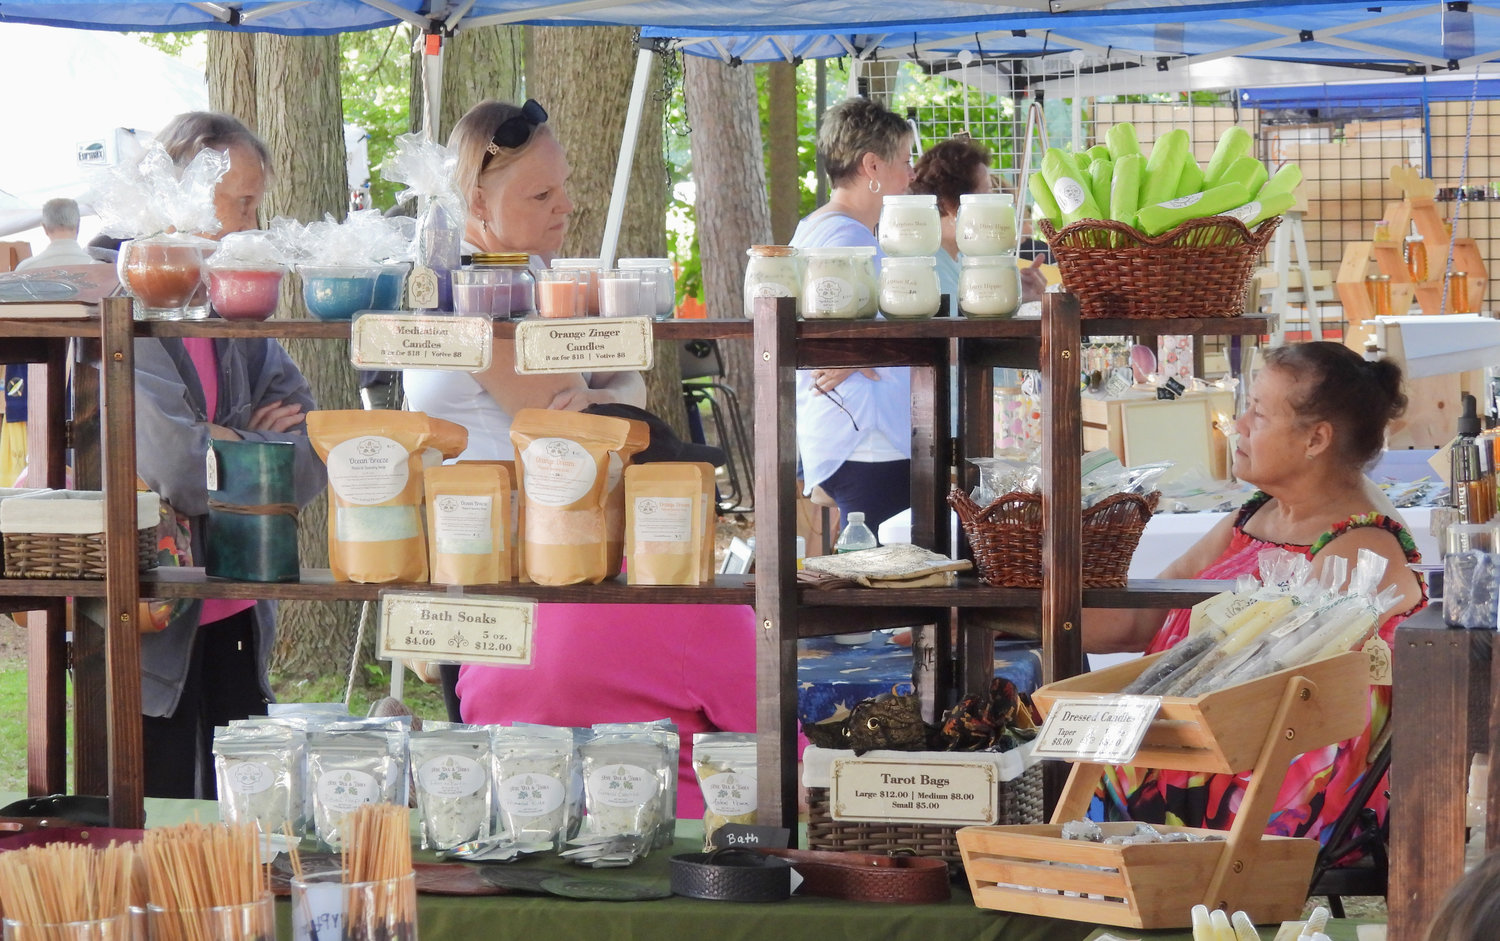 The 58th Annual Madison County Craft Festival saw artisans of every craft under the sun selling their wares at the Madison County Historical Society in Oneida on Saturday, Sept. 10.